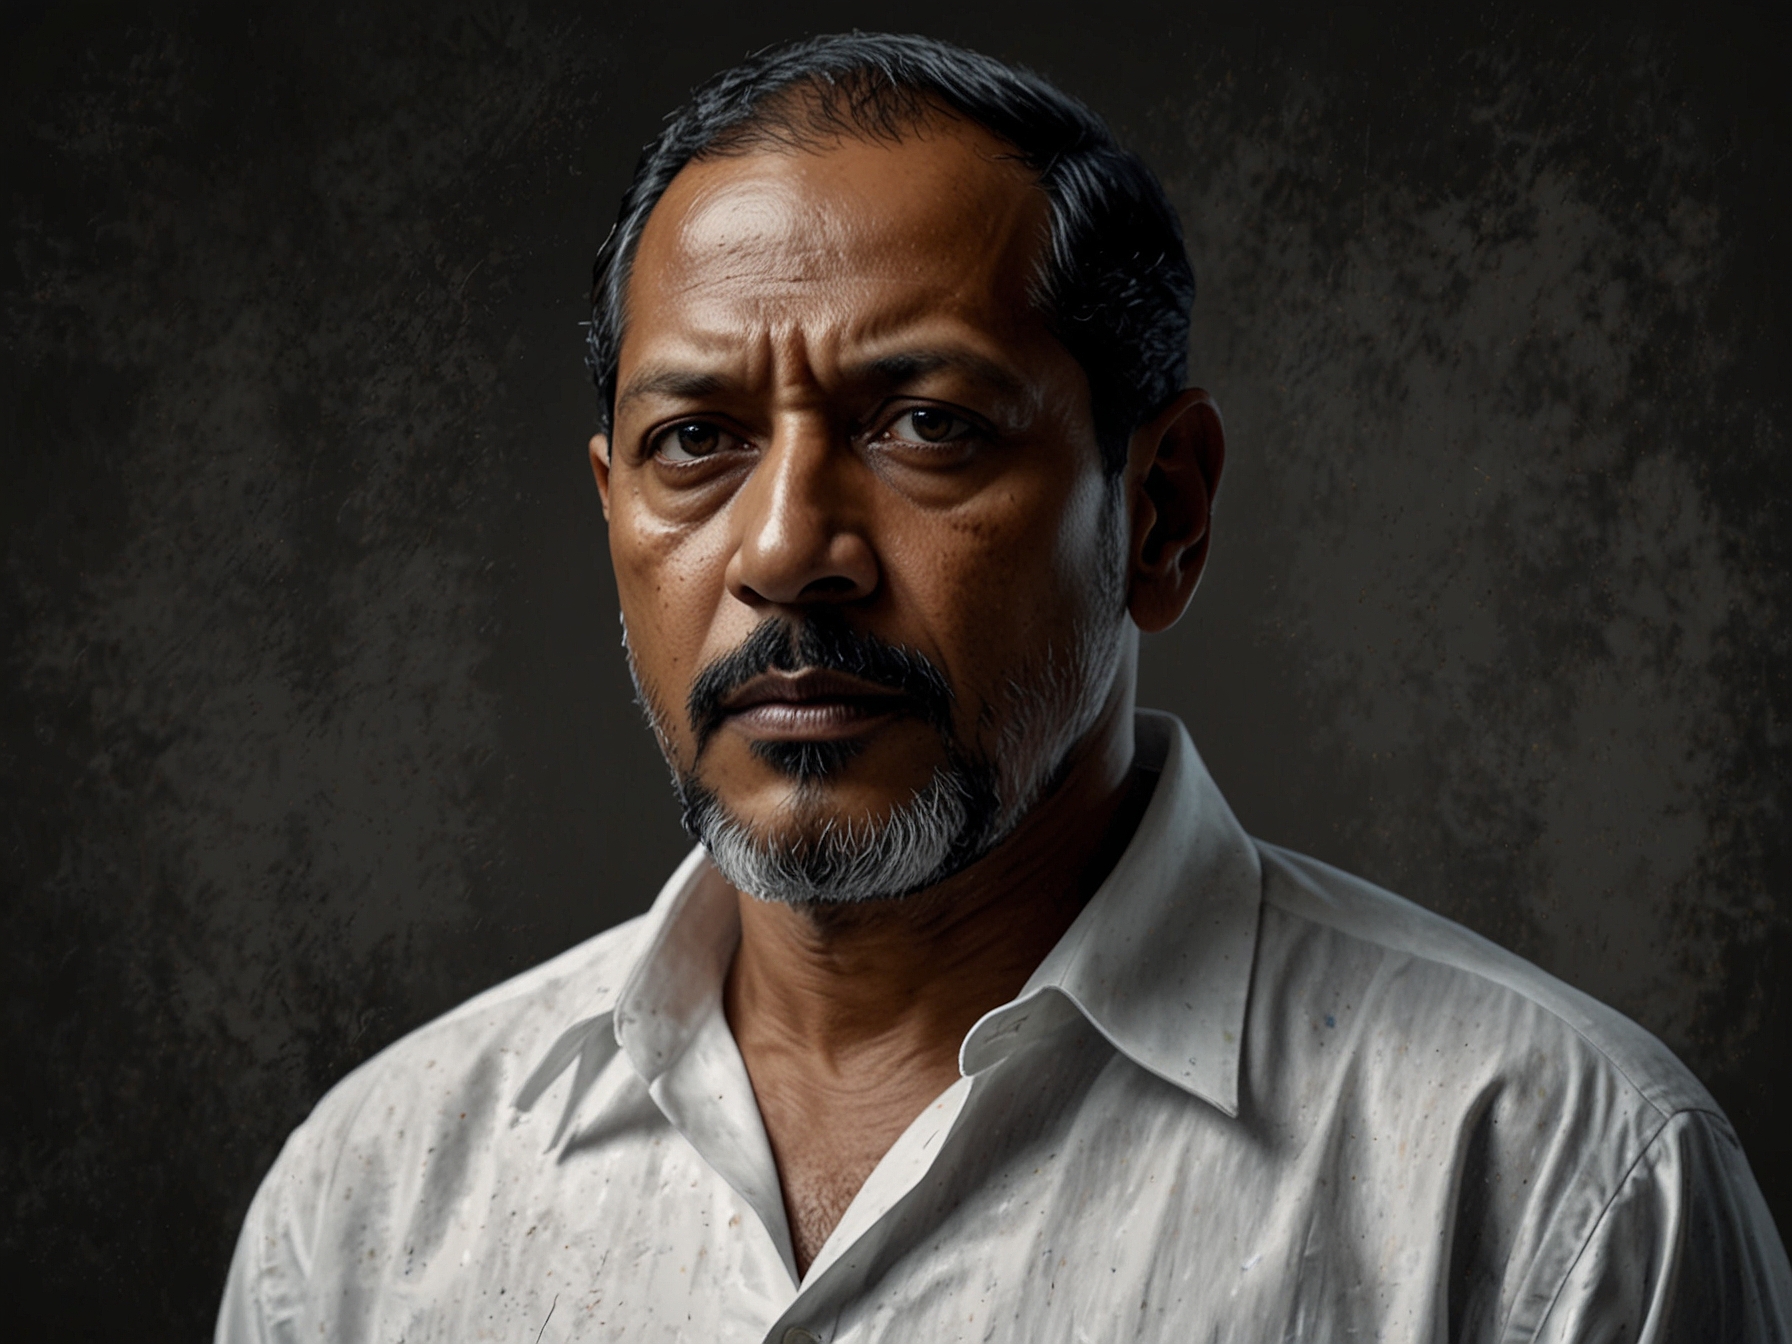 Image of Nana Patekar looking intense, possibly from one of his powerful film roles. This image underscores his reputation for being straightforward and dedicated to his craft.